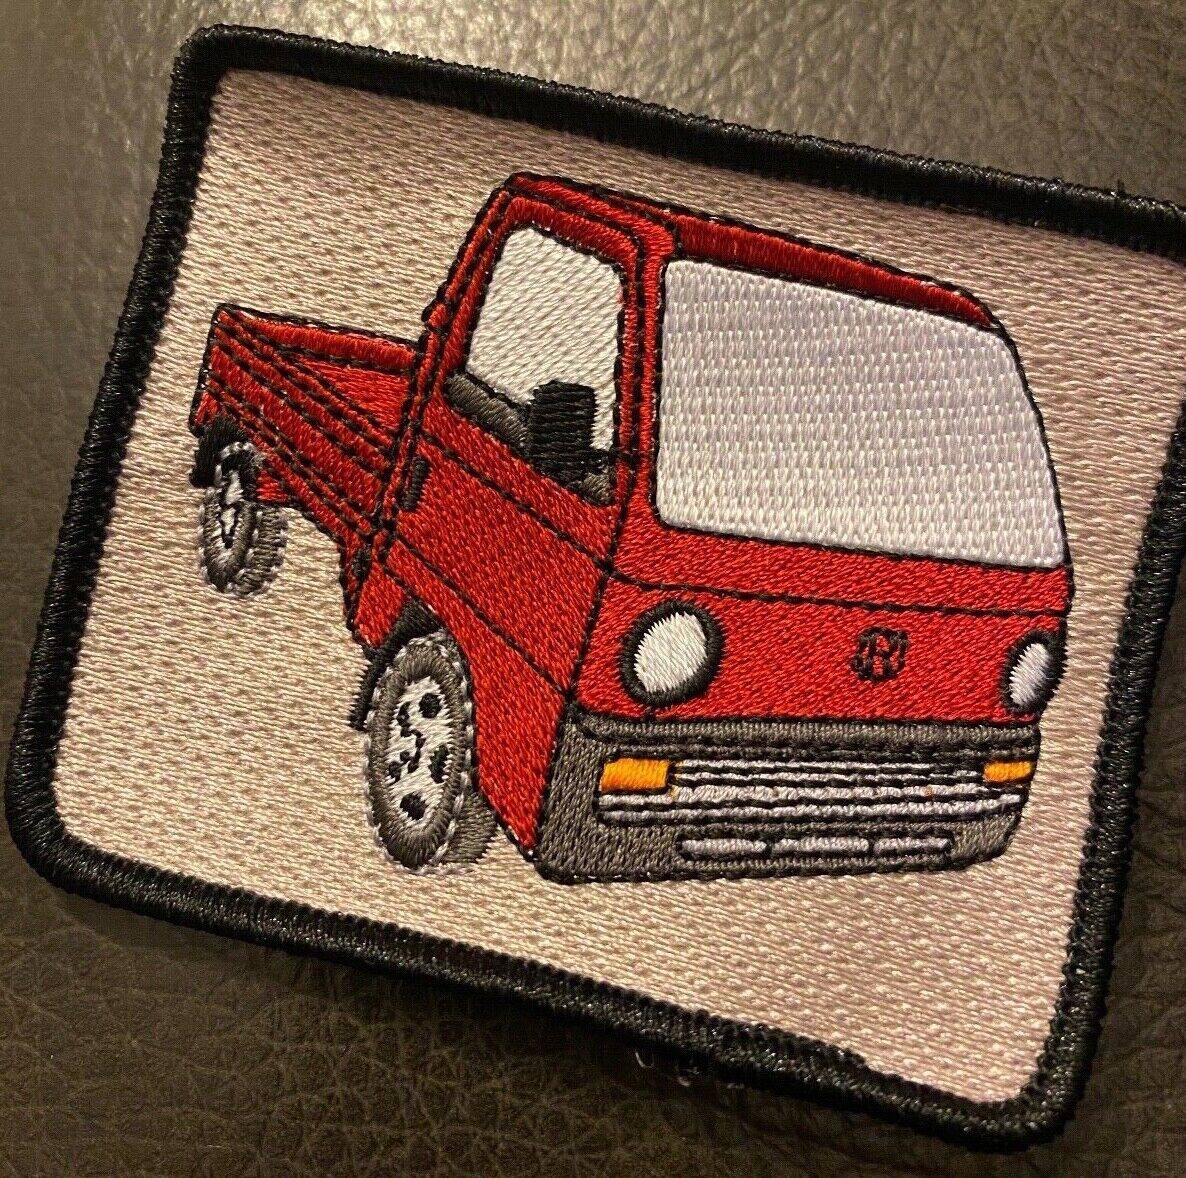 Honda Acty Mini Truck Embroidered Patch